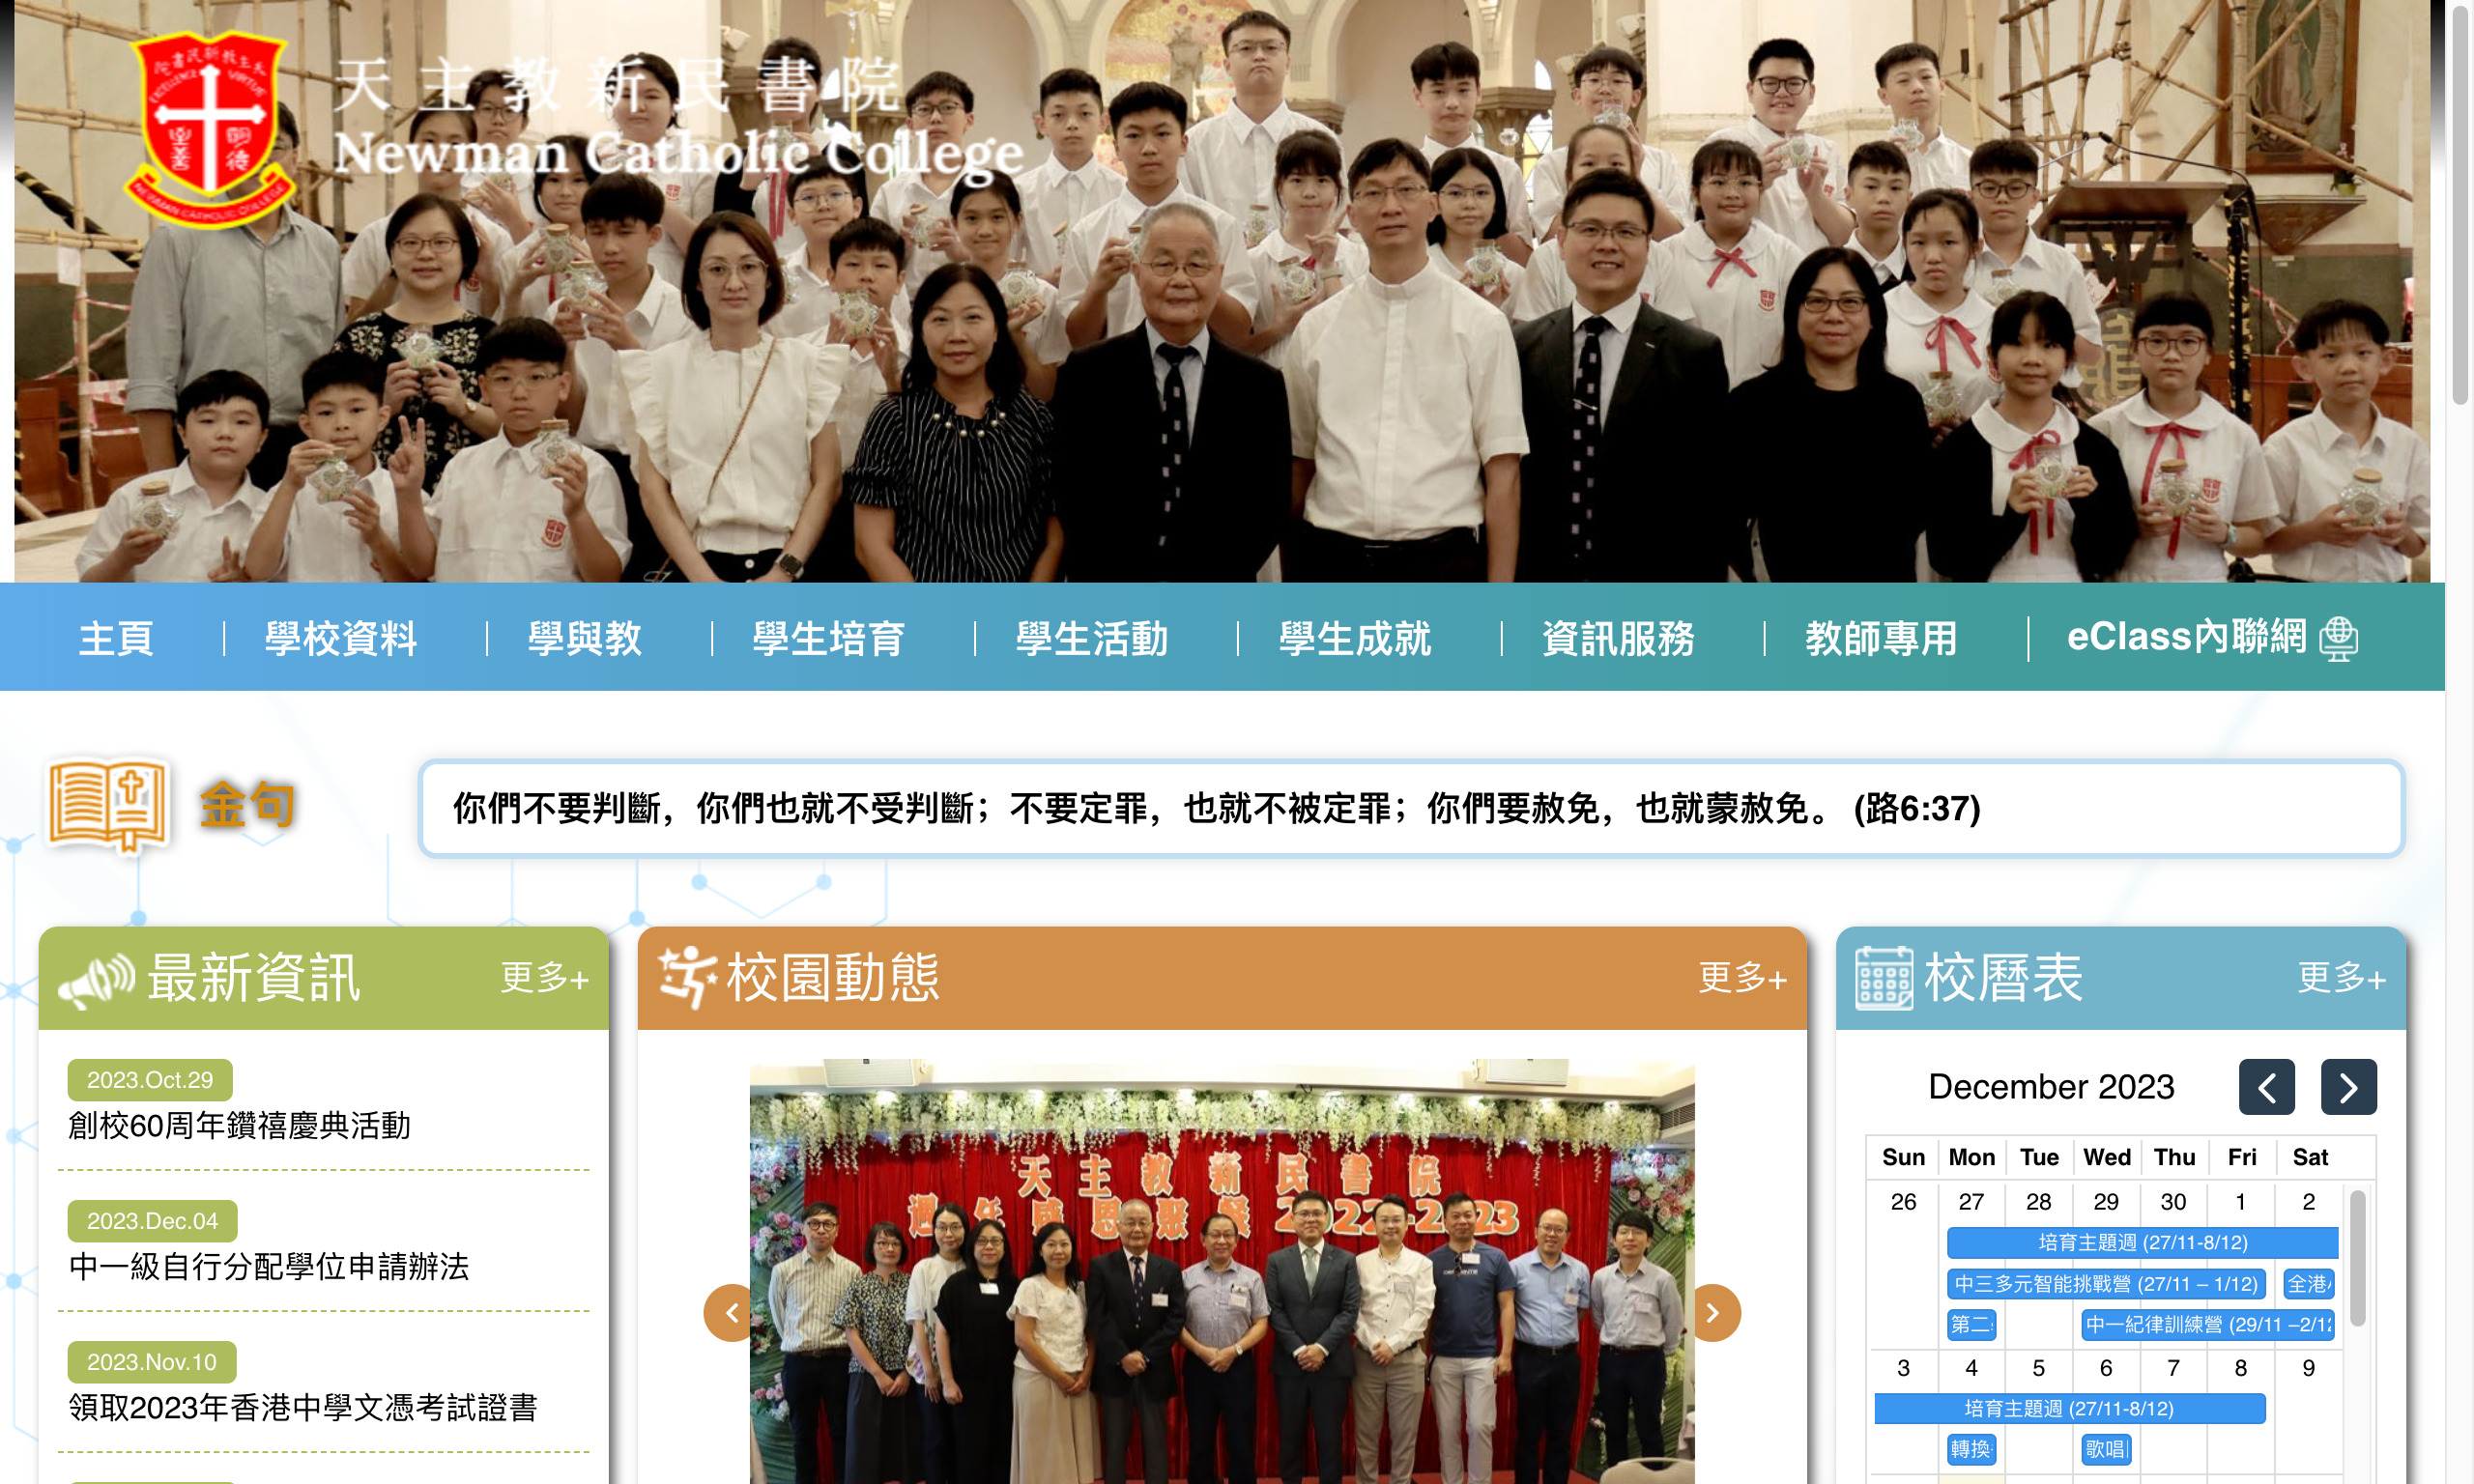 Screenshot of the Home Page of Newman Catholic College